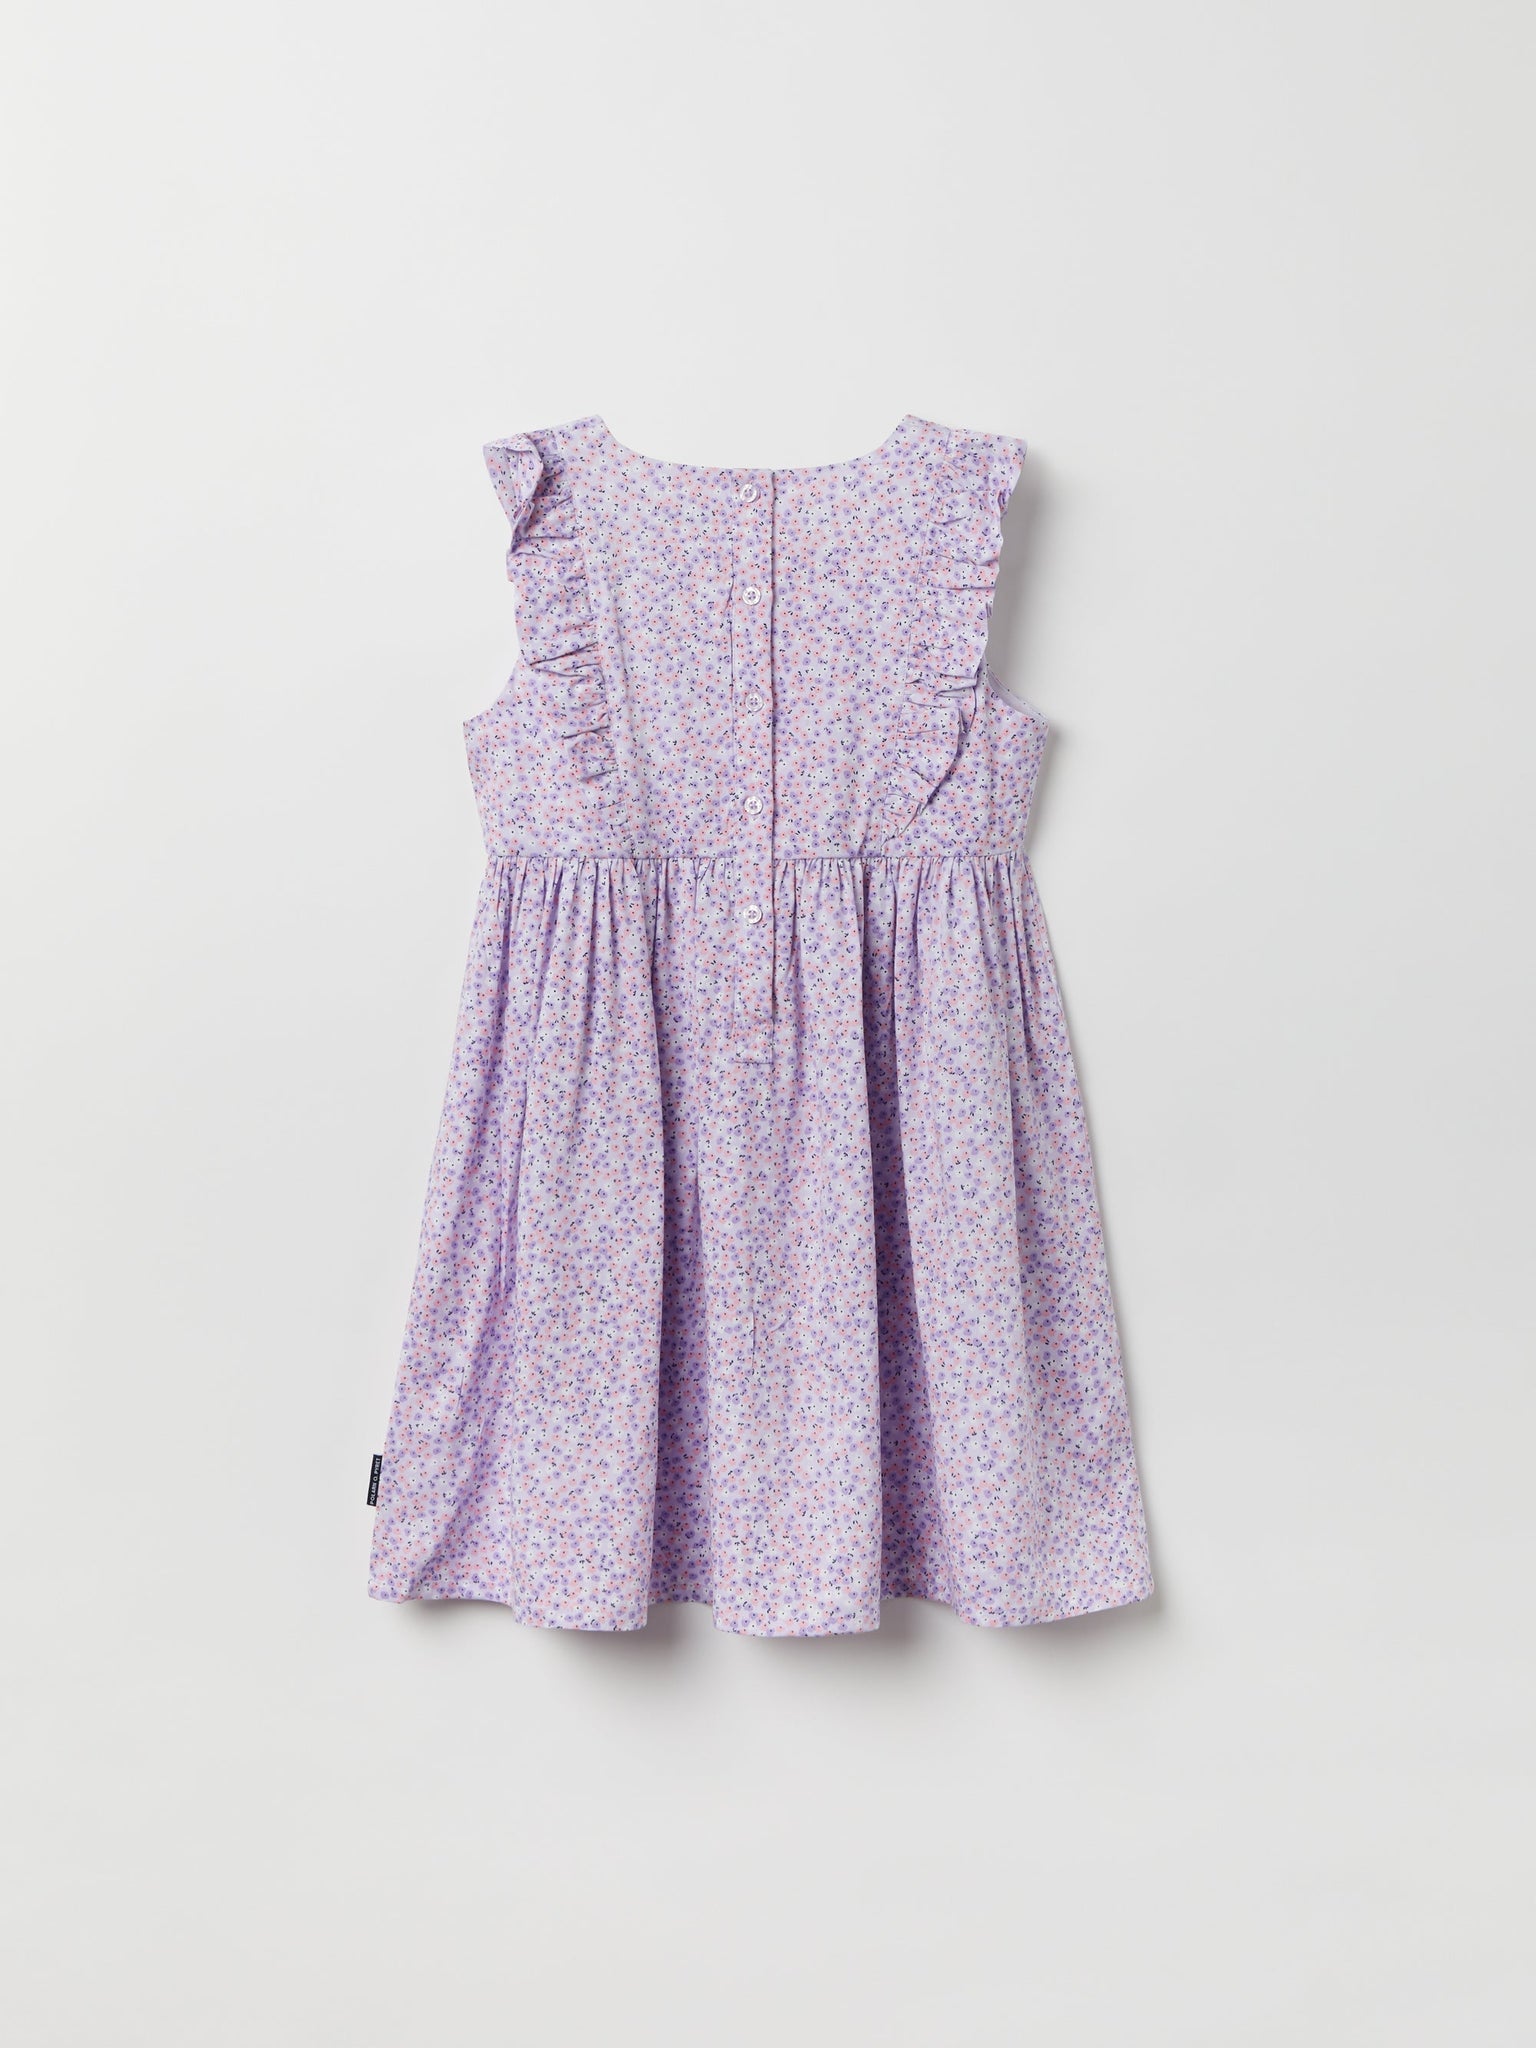 Ditsy Floral Ruffled Dress from the Polarn O. Pyret kidswear collection. Nordic kids clothes made from sustainable sources.